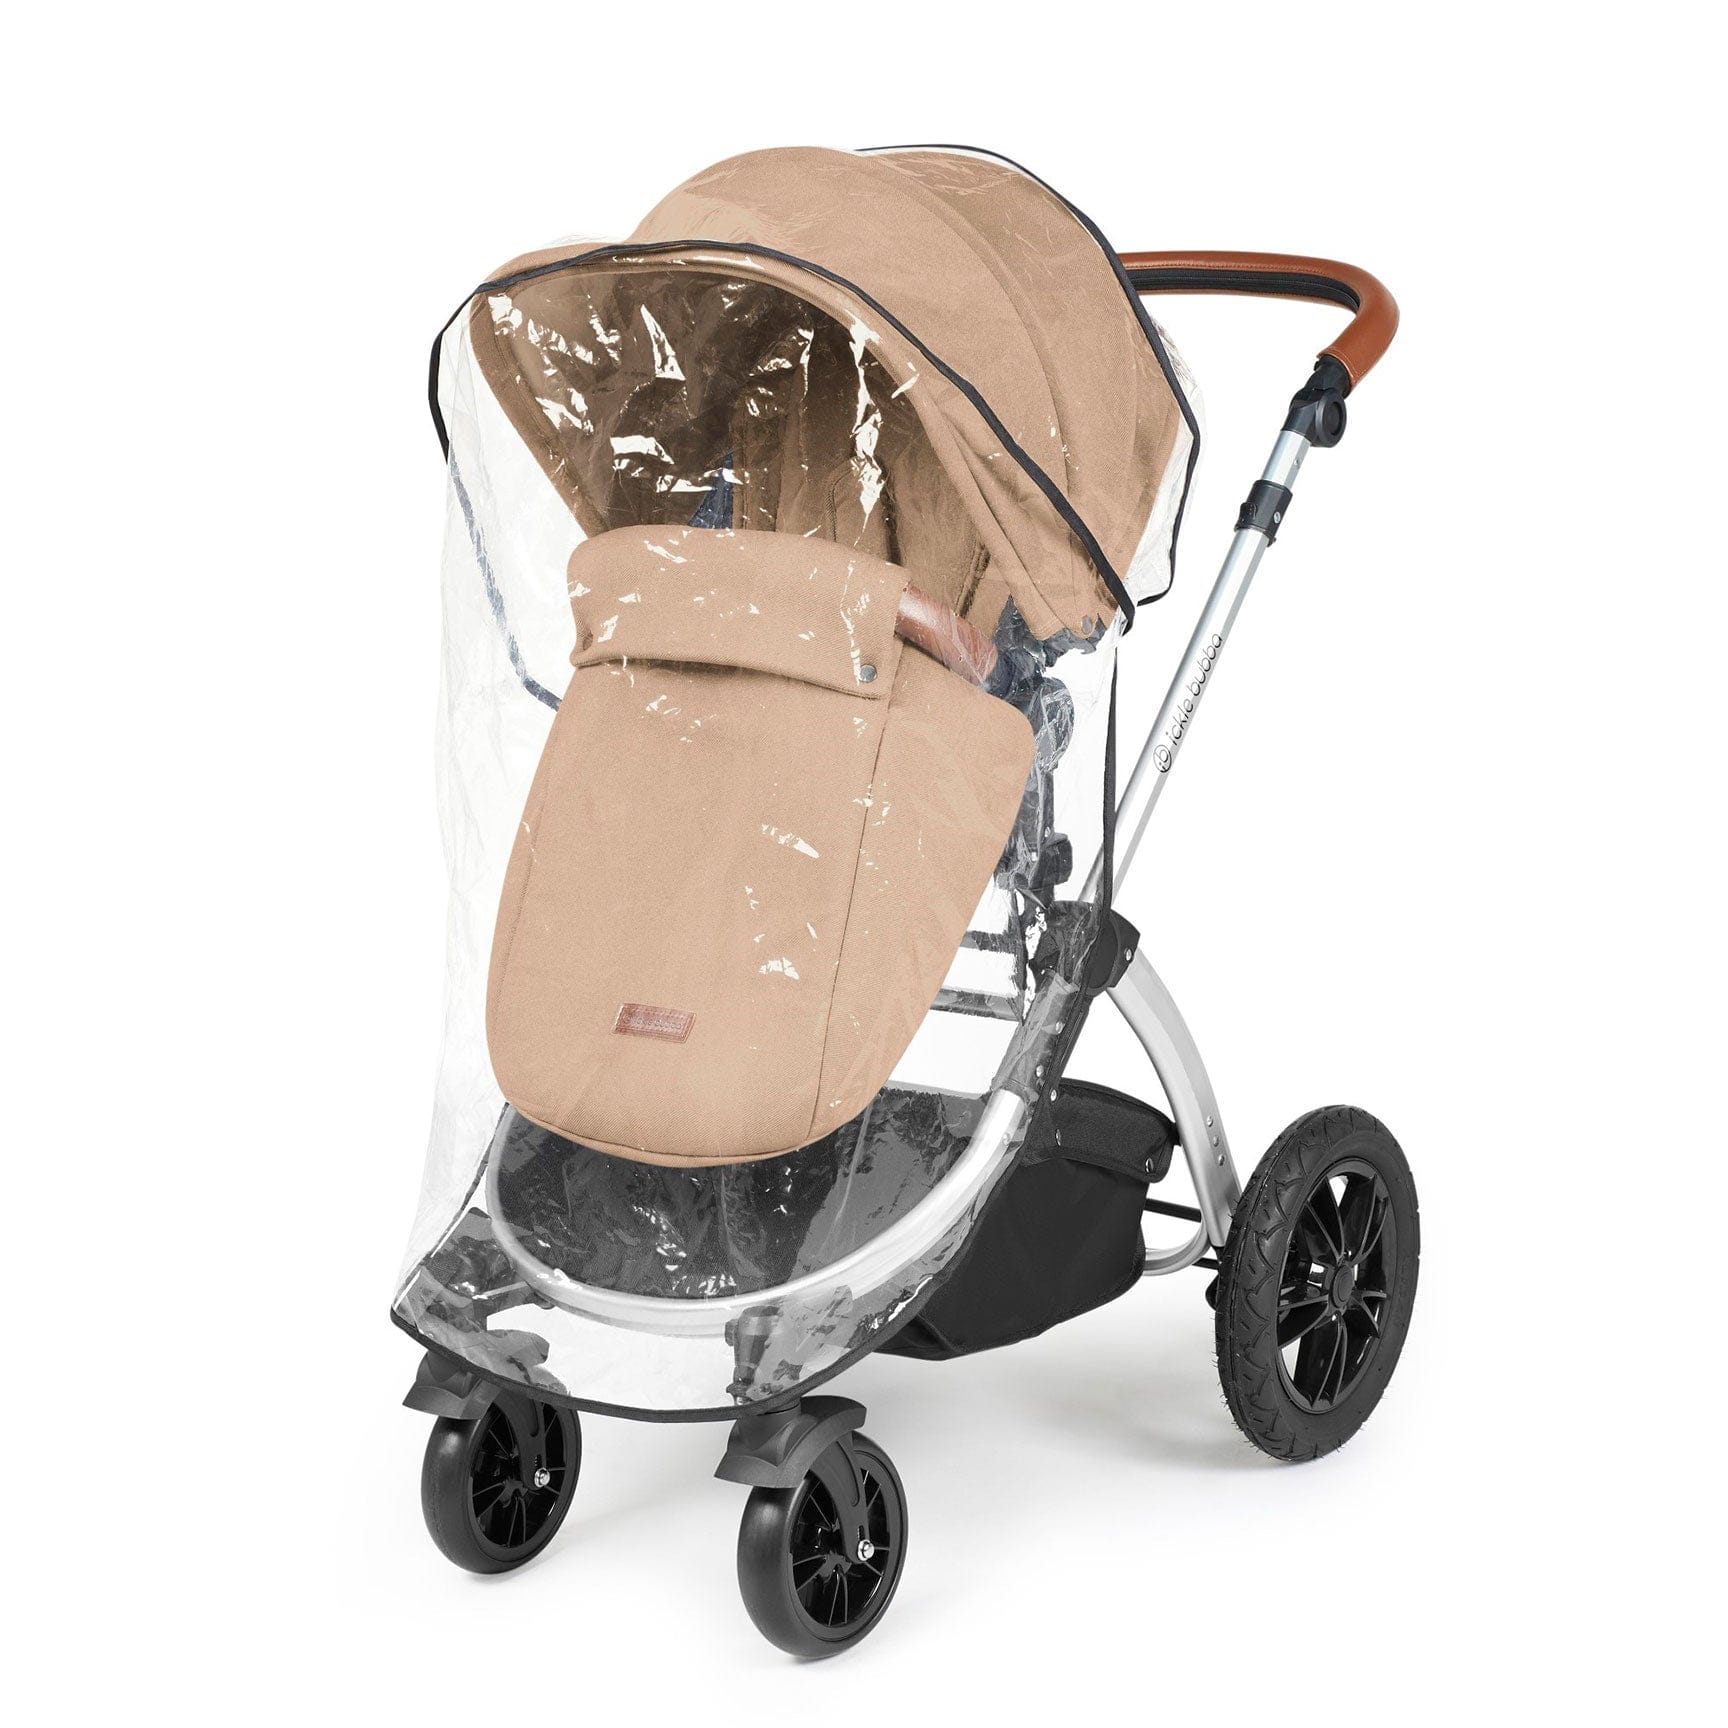 Ickle Bubba Stomp Luxe All-in-One Travel System with Isofix Base in Silver/Desert/Tan Travel Systems